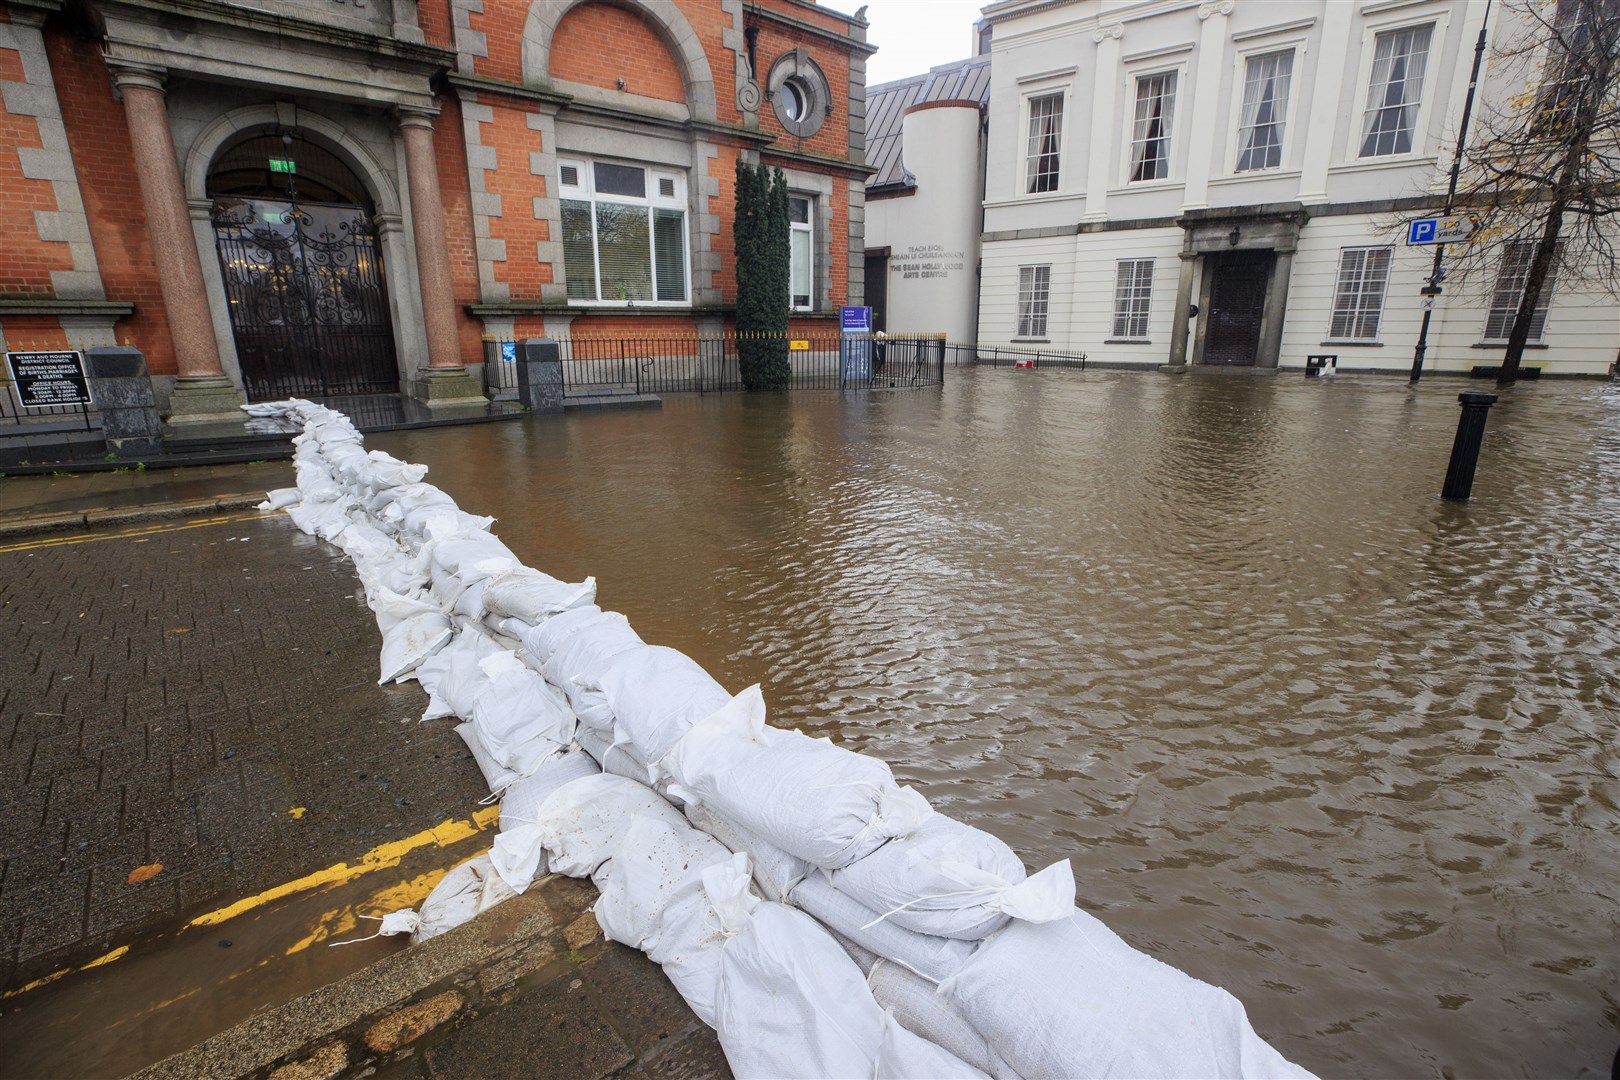 Sandbags hold back floodwater at Bank Parade in Newry on Tuesday (Liam McBurney/PA)